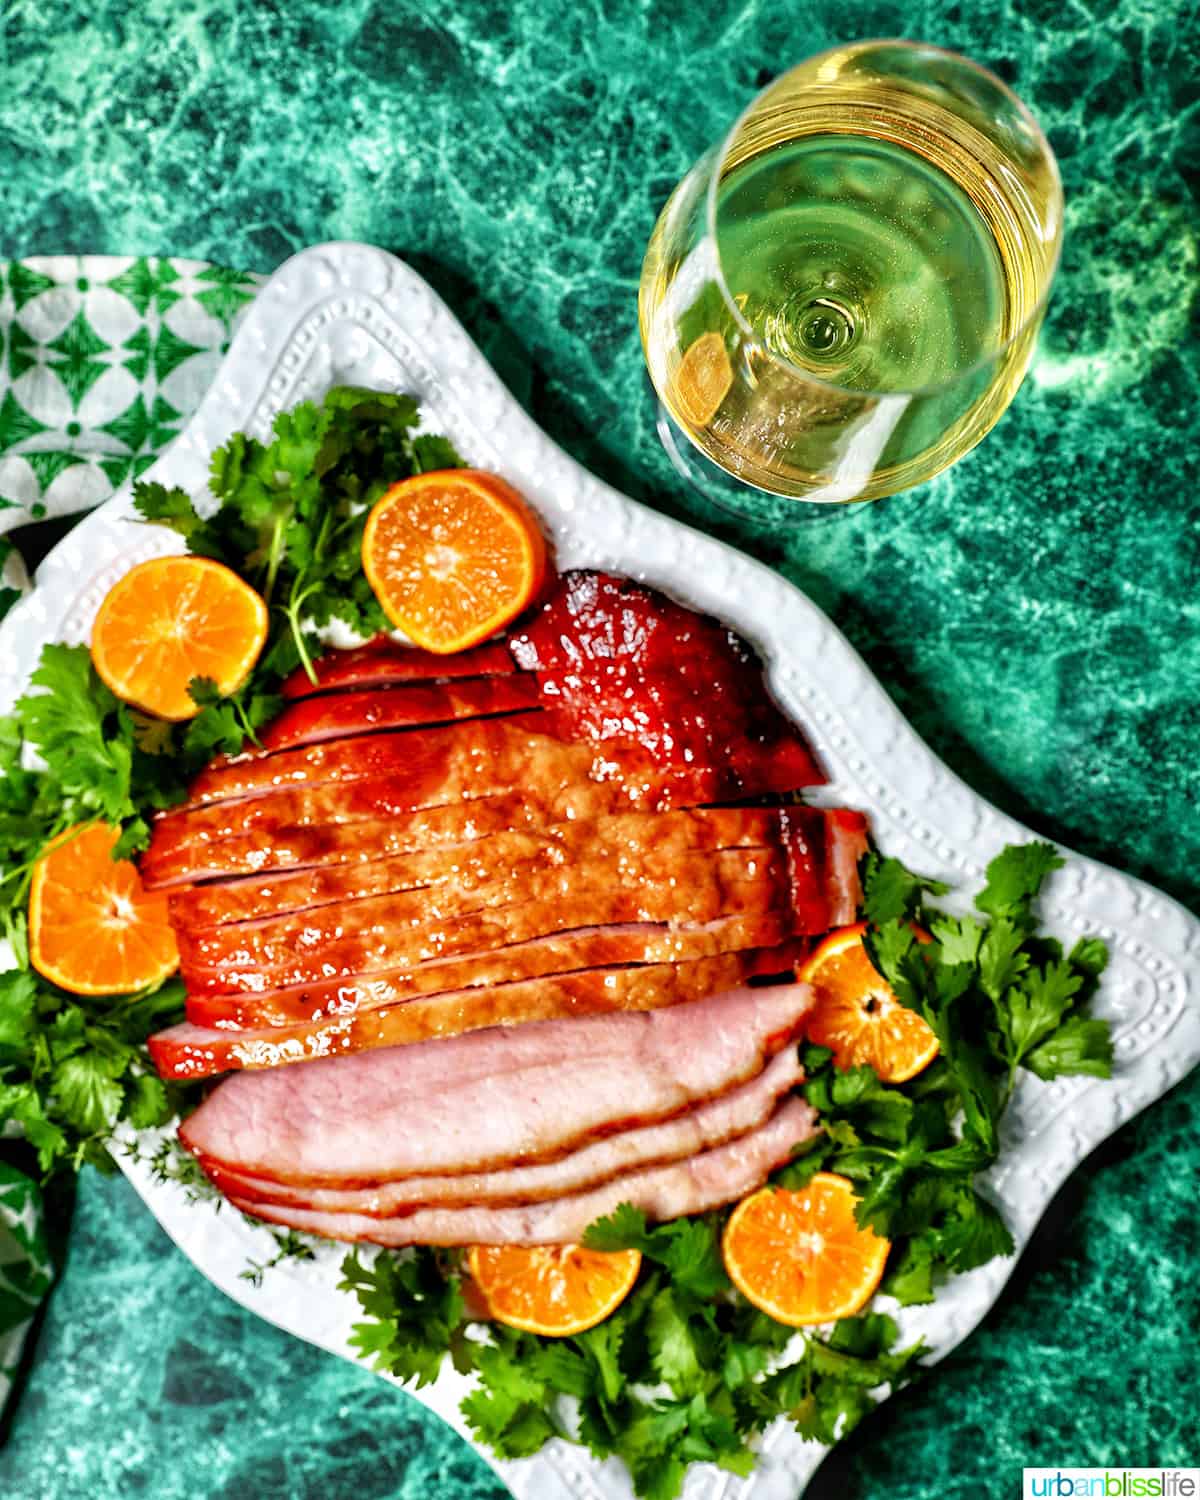 Glass of white wine behind a platter of honey glazed ham with garnishes.